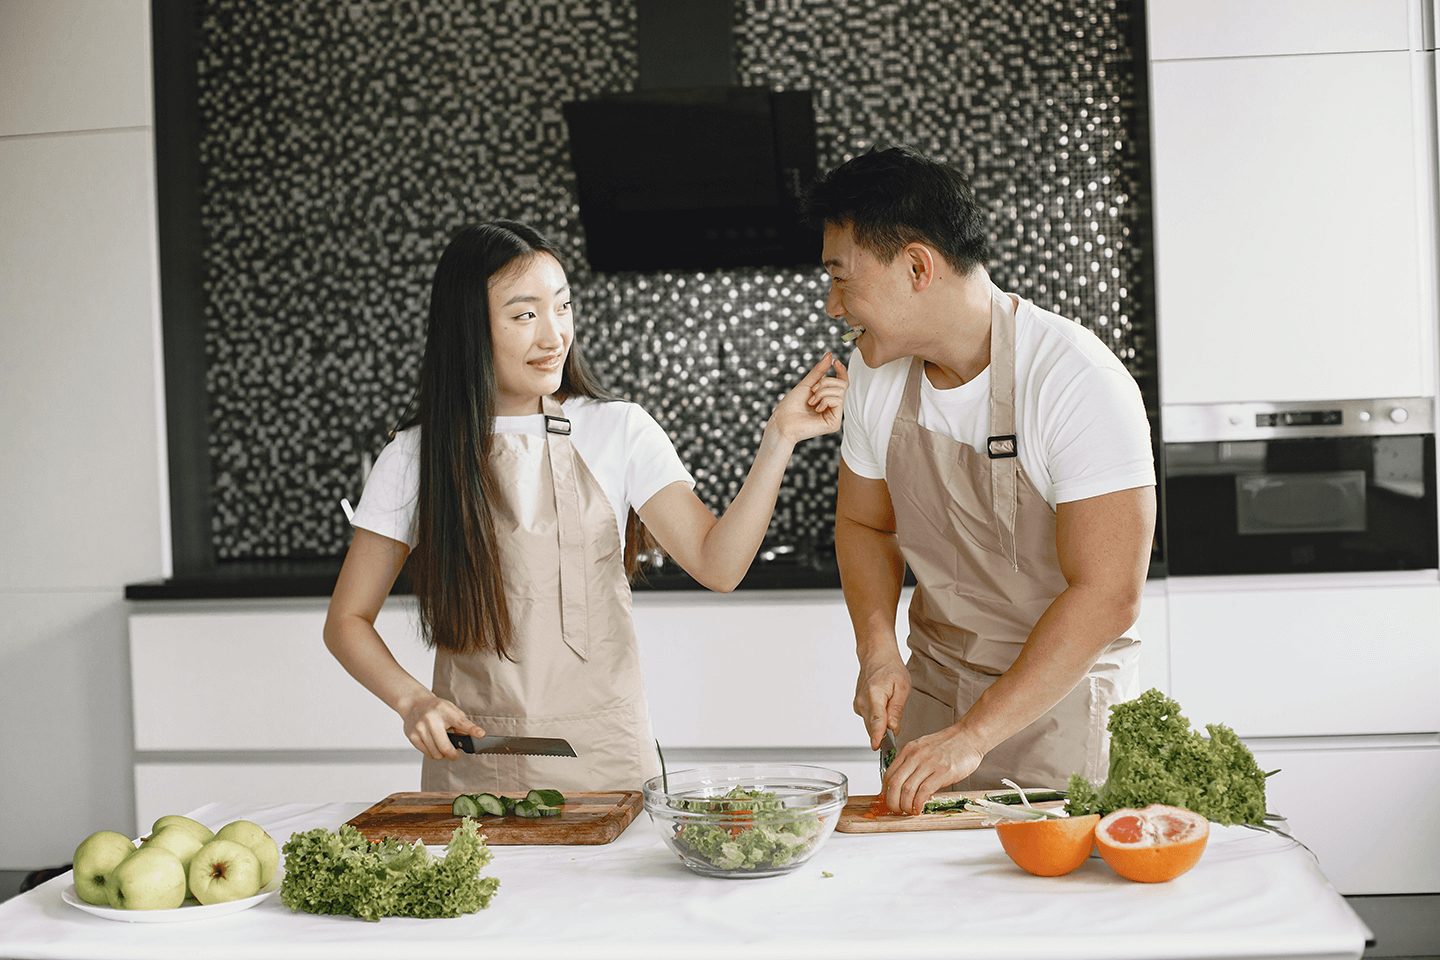 A couple taking a cooking class together as one of their date ideas.